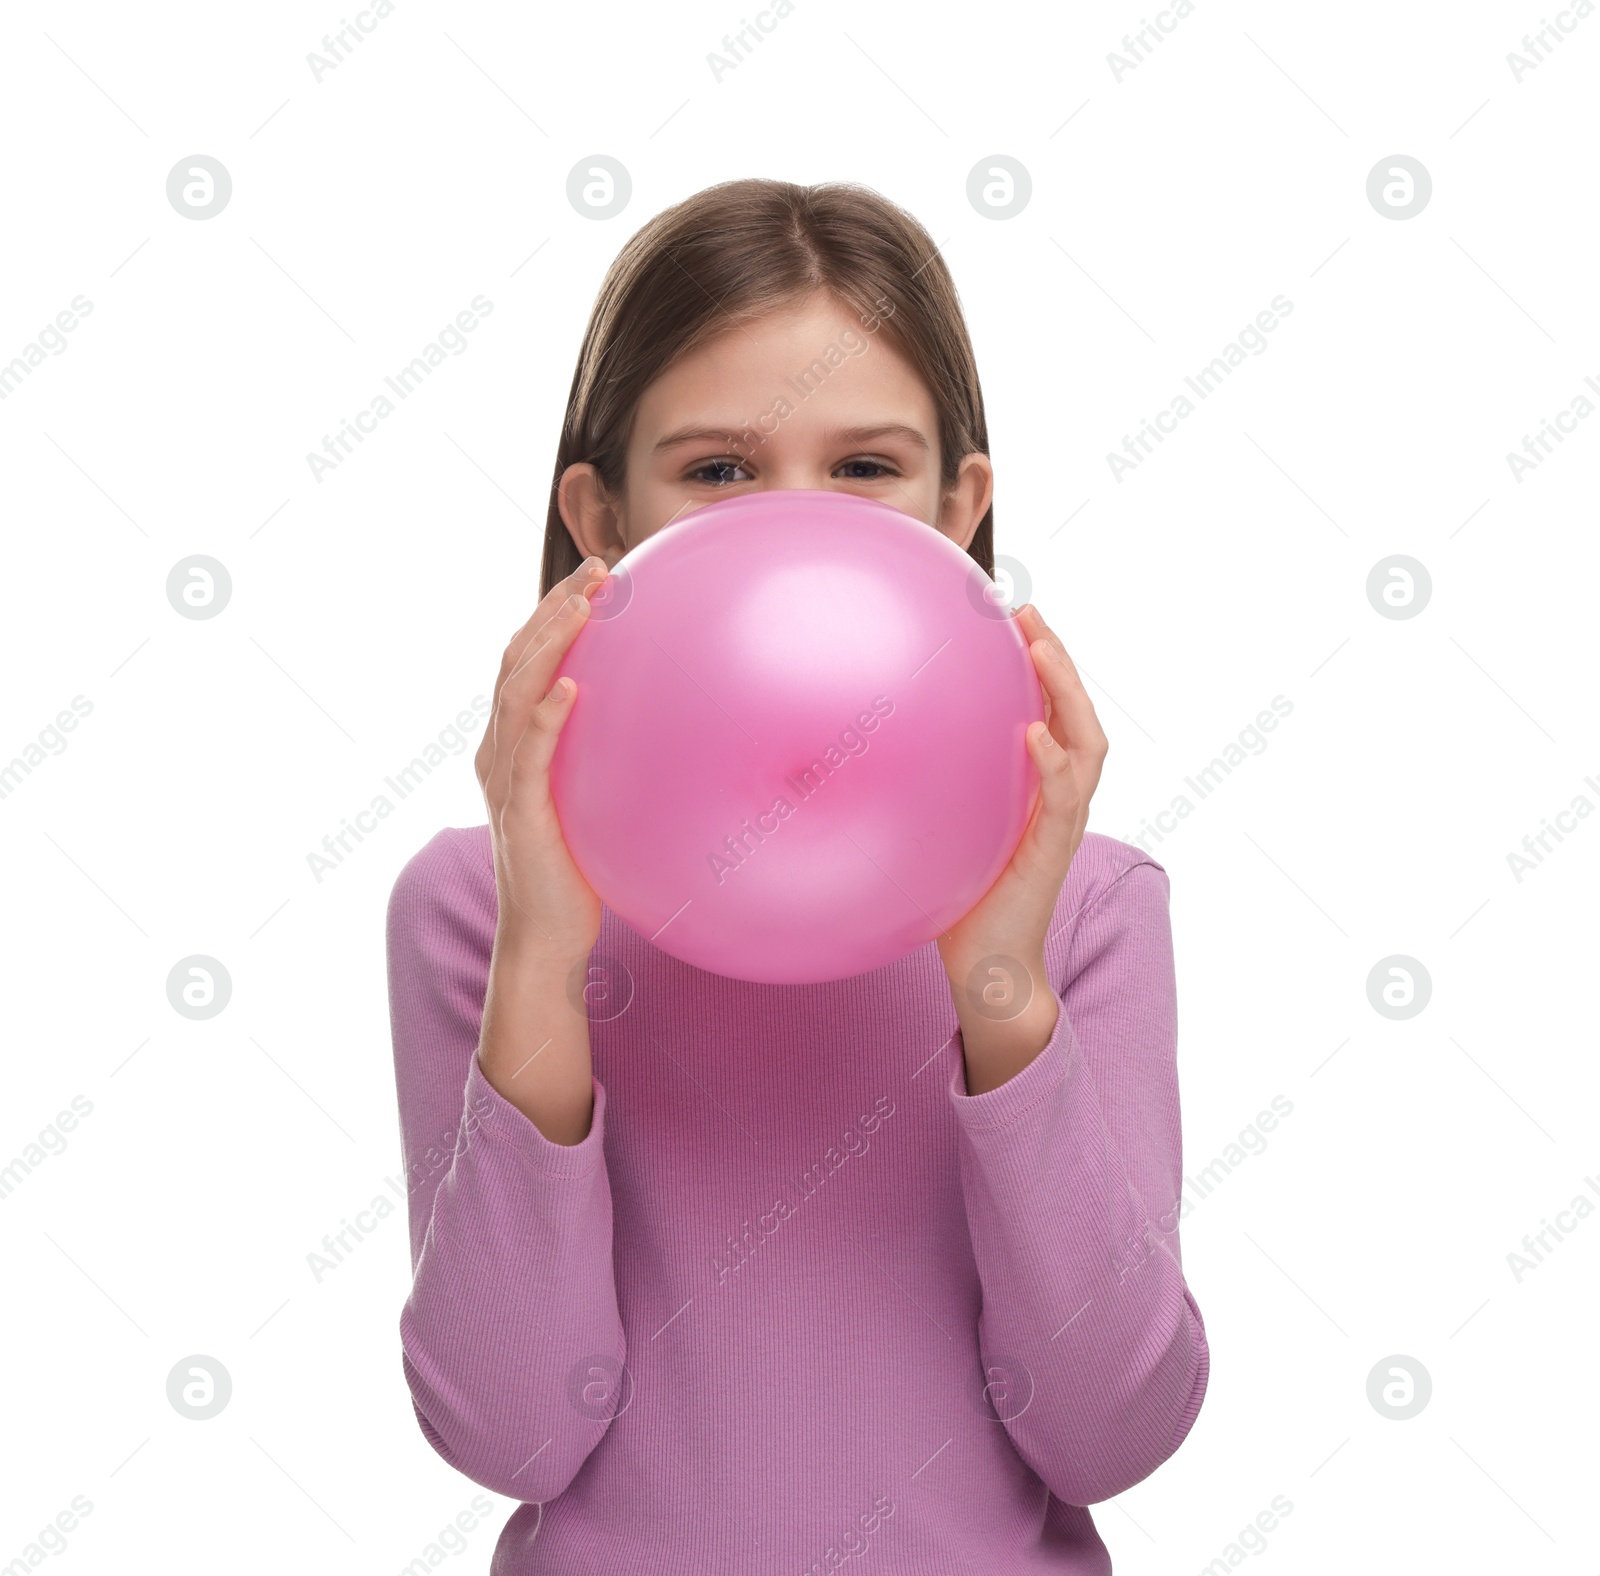 Photo of Girl inflating pink balloon on white background